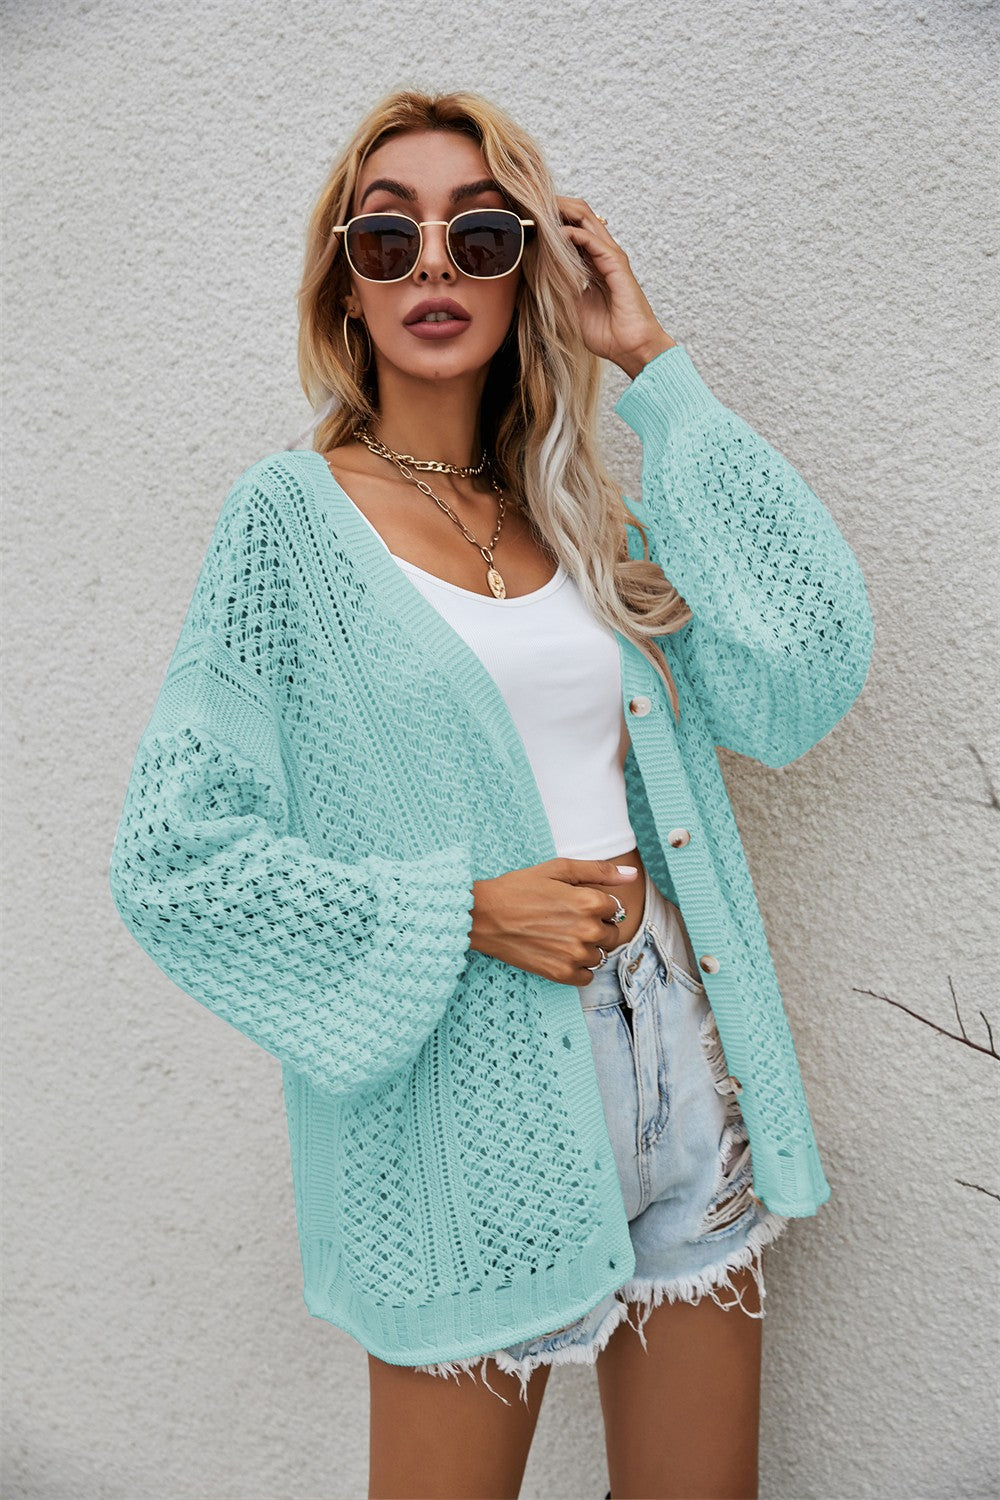 Openwork V-Neck Dropped Shoulder Cardigan - Women’s Clothing & Accessories - Shirts & Tops - 8 - 2024